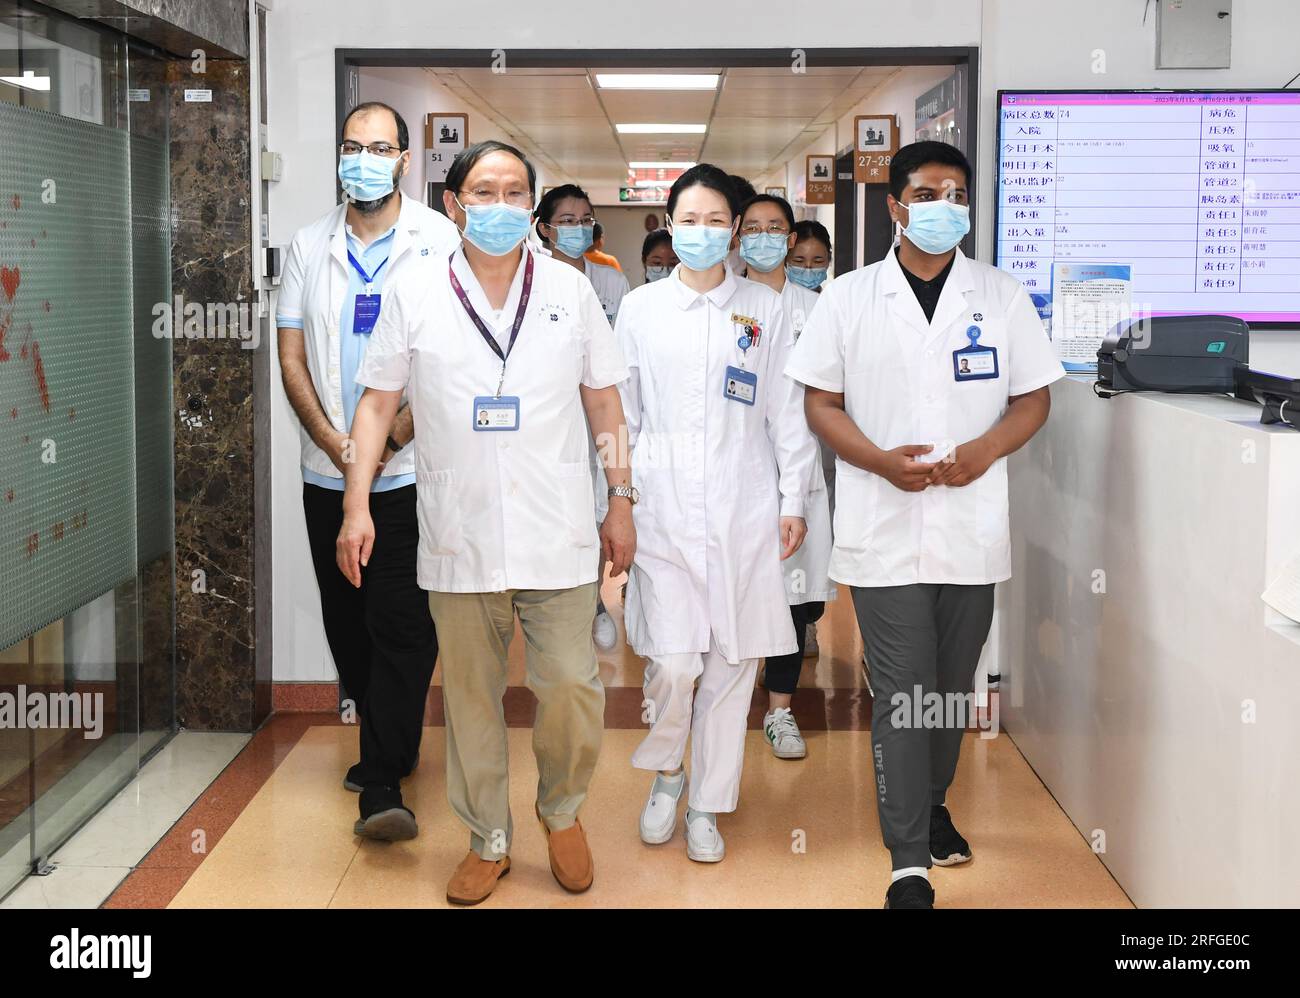 (230803) -- NANJING, Aug. 3, 2023 (Xinhua) -- Fan Zhining (L front), expert of digestive endoscopy, visits the inpatient wards with foreign medical workers of a medical seminar at Jiangsu Province Hospital in Nanjing, capital of east China's Jiangsu Province, Aug. 1, 2023. In recent years, Jiangsu Province Hospital cooperated with medical institutions in Pakistan, Egypt and other countries and regions in the field of digestive endoscopy to promote medical cooperation under the Belt and Road Initiative. (Xinhua/Ji Chunpeng) Stock Photo